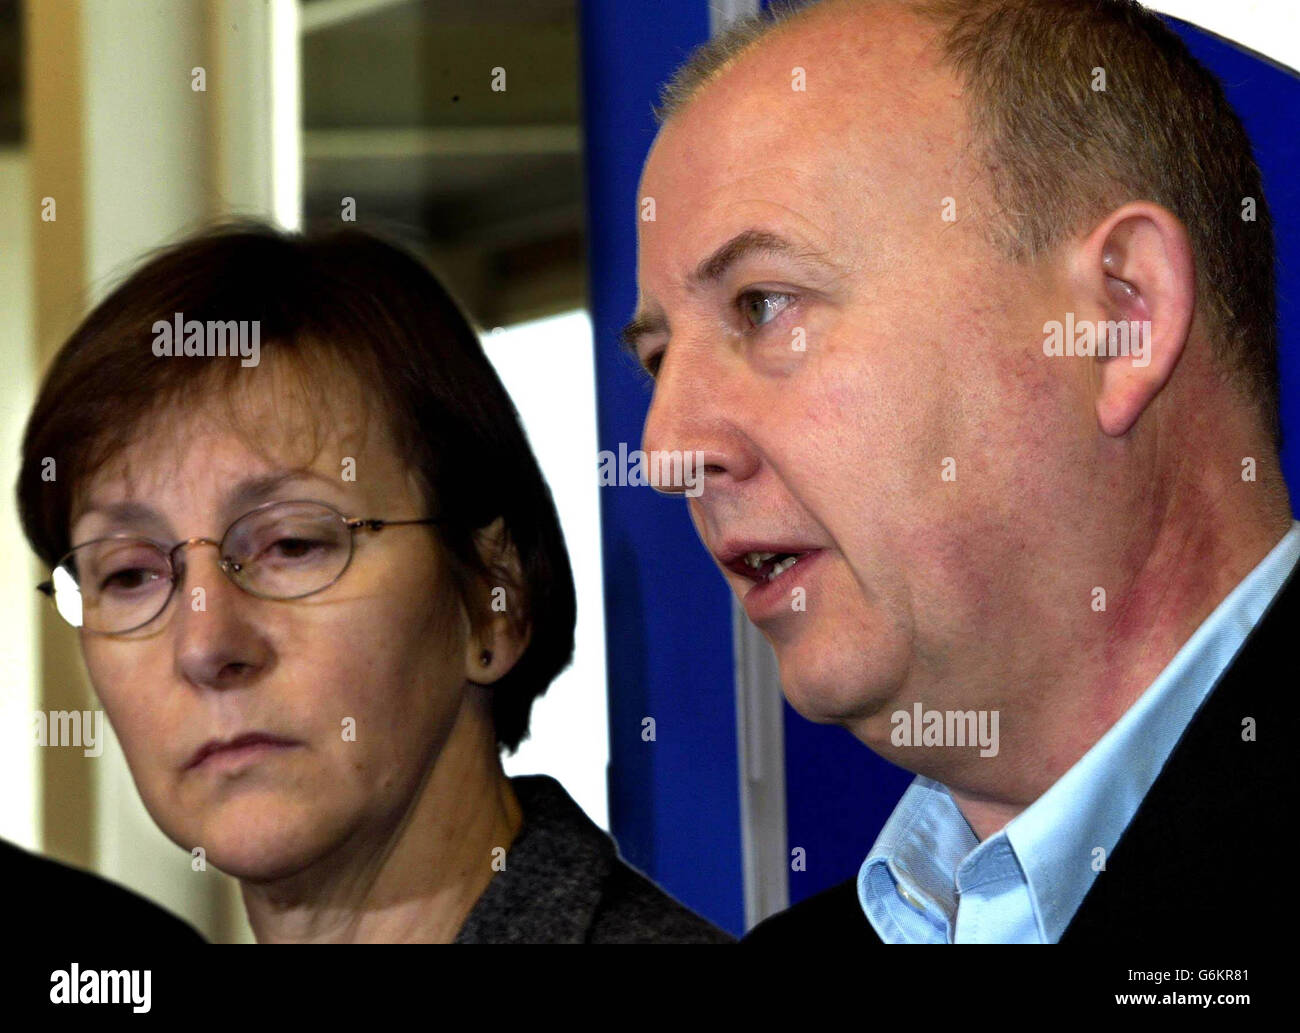 Paul and Mary Hilder during police news conference at Hereford Racecourse, appealing for fresh information into the their son's murder, skydiver Stephen Hilder, one week before what would have been his 21st birthday. Mr Hilder plunged 13,000ft to his death over Hibaldstow airfield, north Lincolnshire, on July 4, after both his main and reserve parachutes were sabotaged.Three men, two aged 19 and one aged 24, have been arrested in the weeks following the death and have all been released on police bail pending further inquiries. Stock Photo